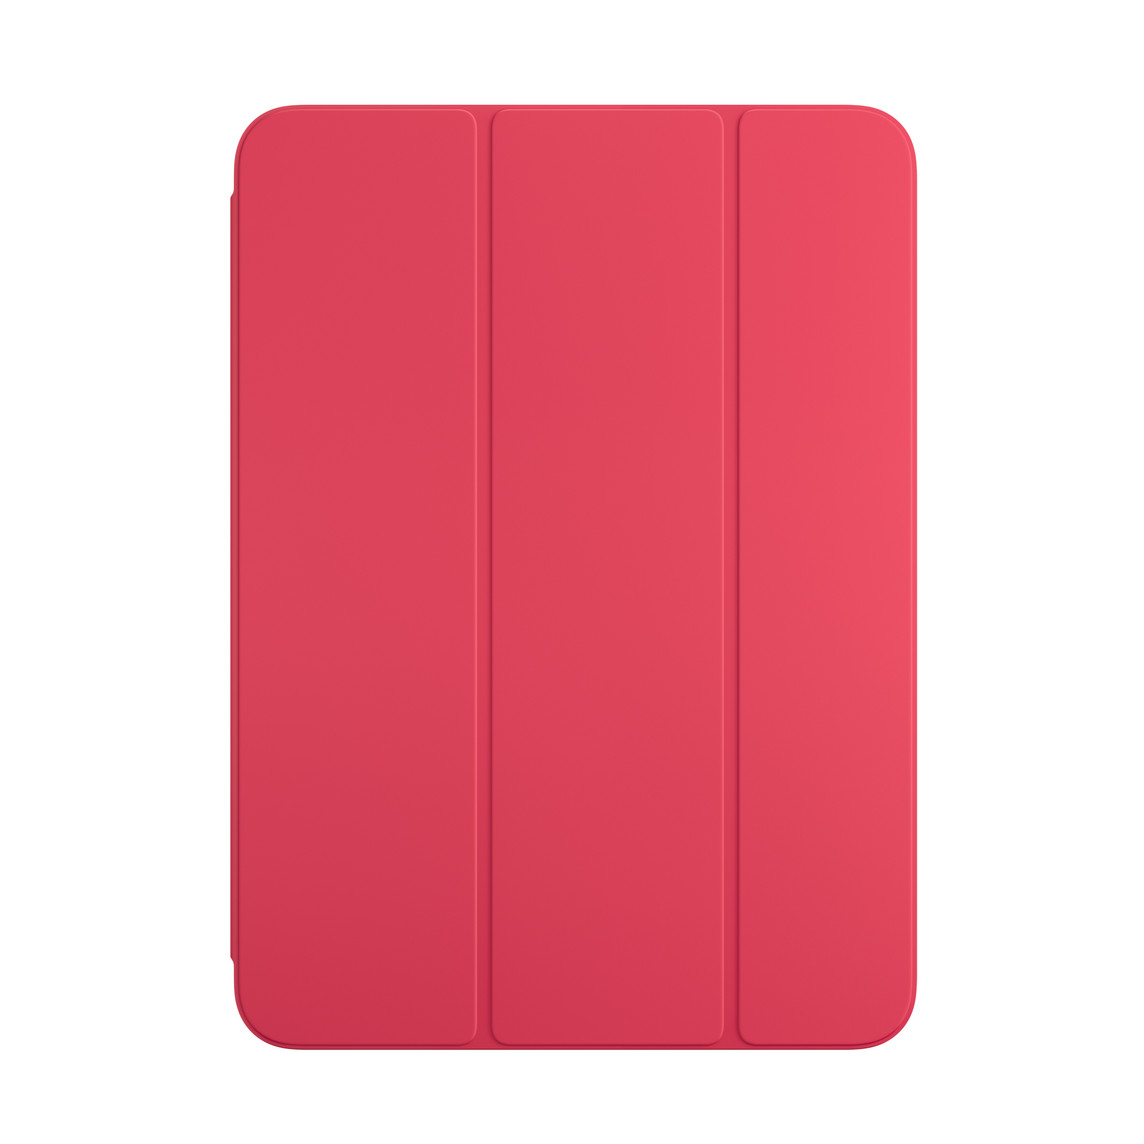 Front view of Watermelon Smart Folio for iPad